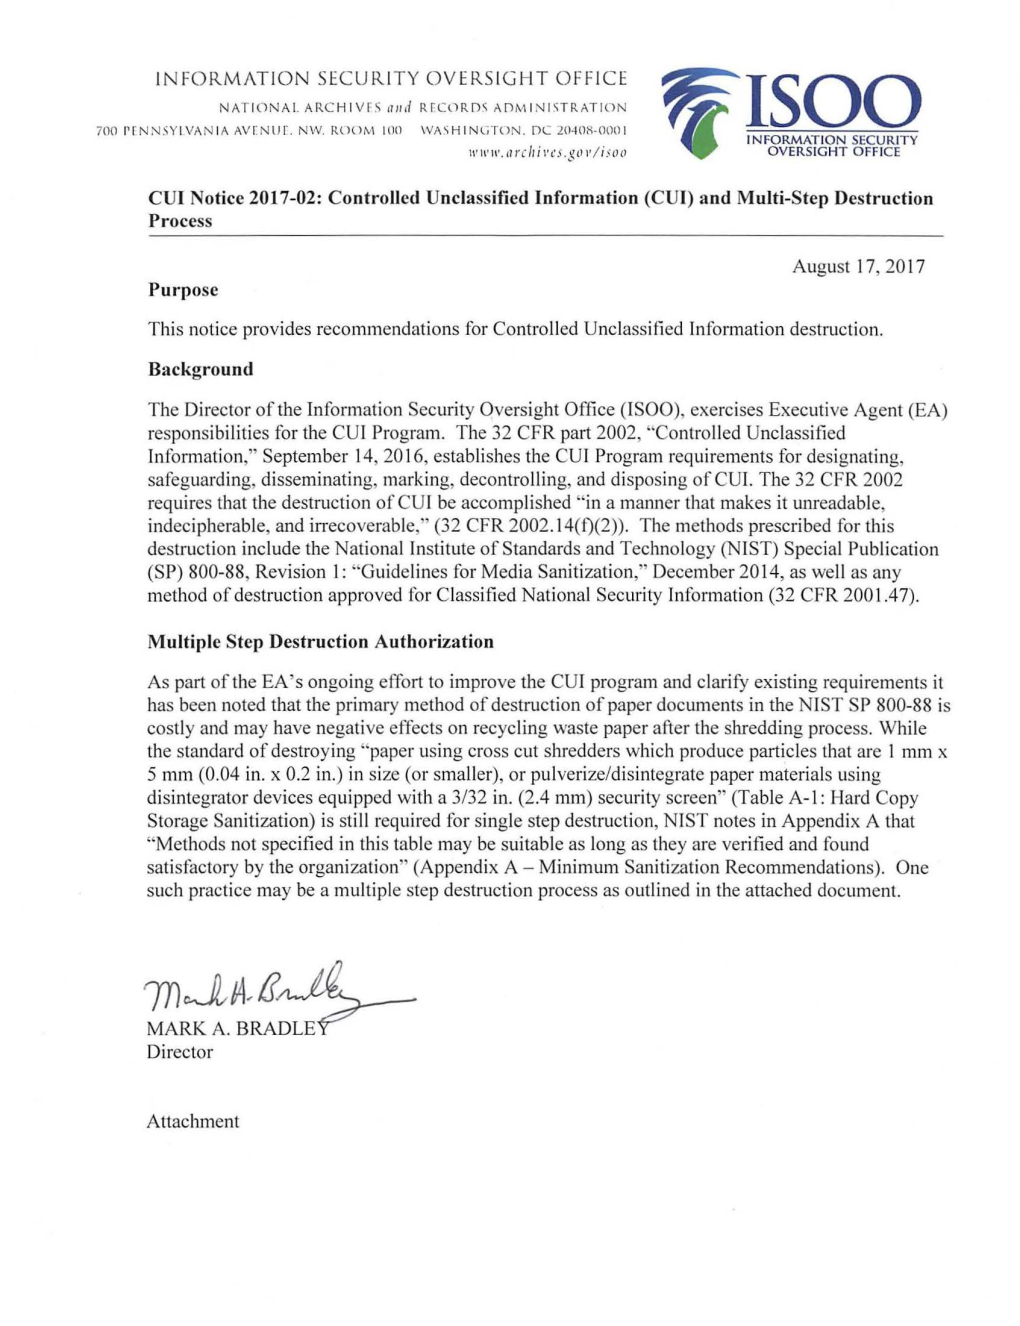 CUI Notice 2017-02: Controlled Unclassified Information (Cur) and Multi-Step Destruction Process